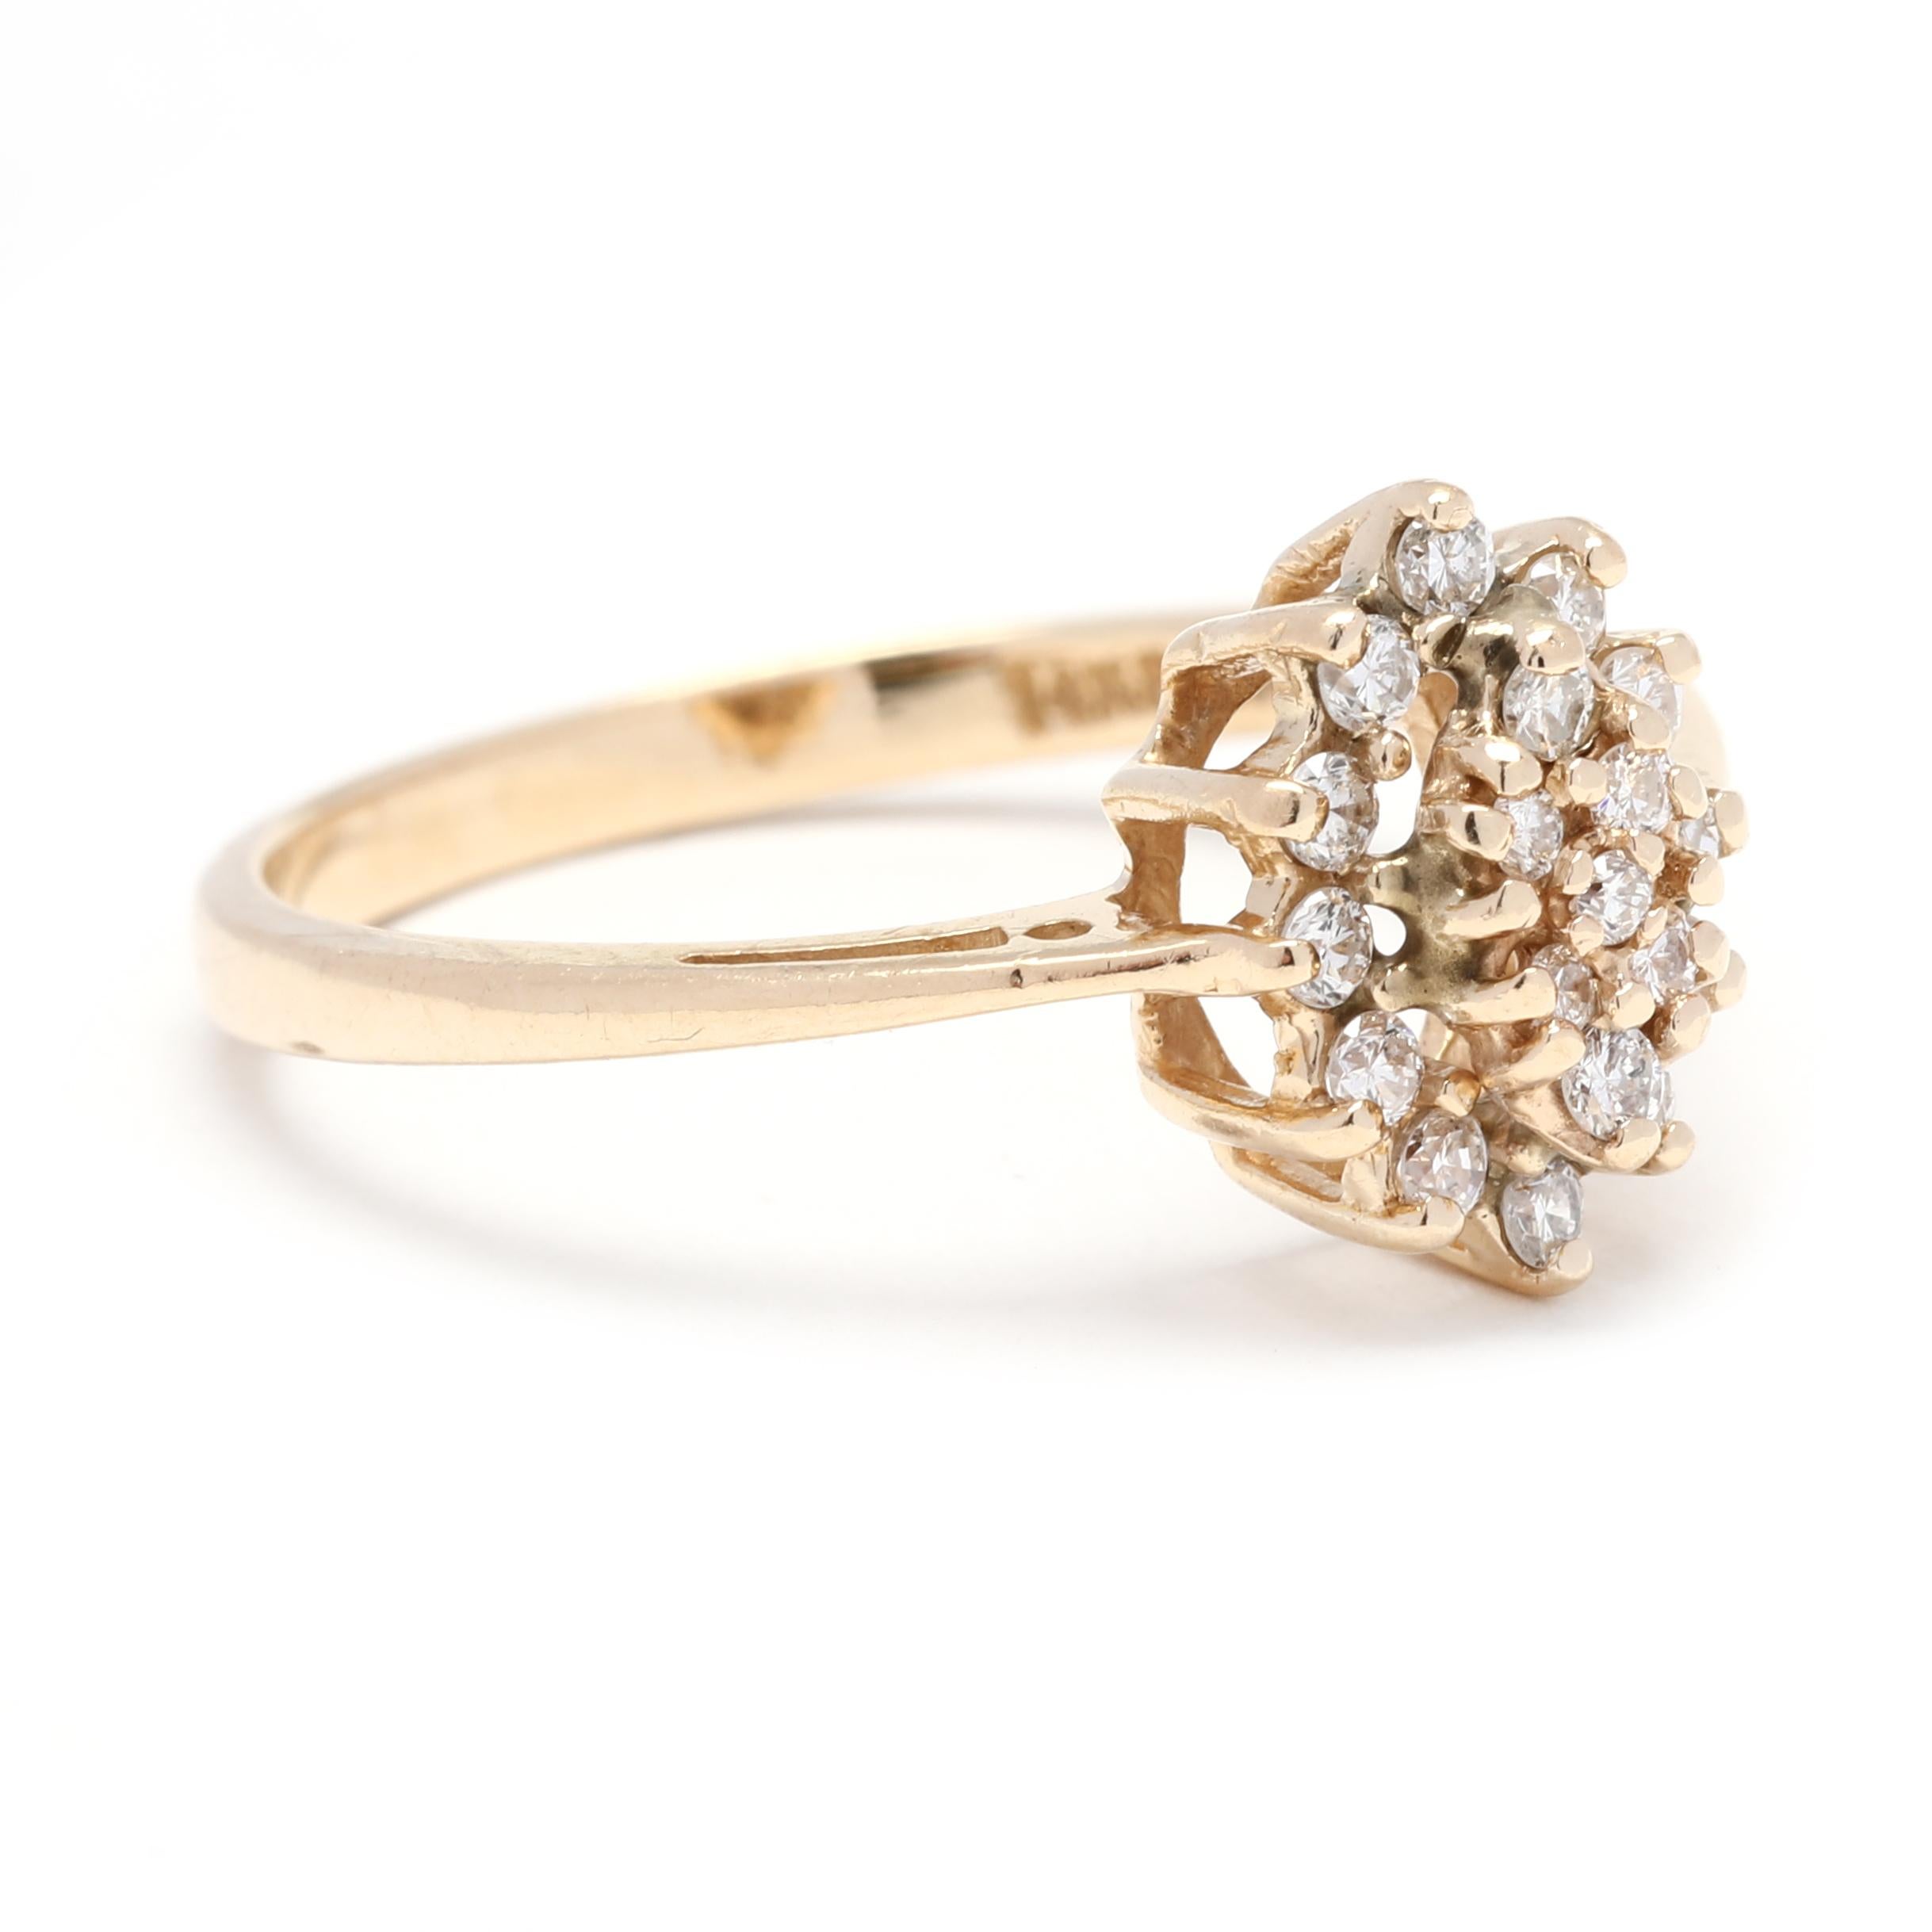 This beautiful 0.25ctw navette diamond cluster ring radiates classic beauty. Crafted in 14K yellow gold, the ring features a clustered setting of 12 dazzling diamonds for extra sparkle and shine. Elegant and timeless, this diamond ring makes the